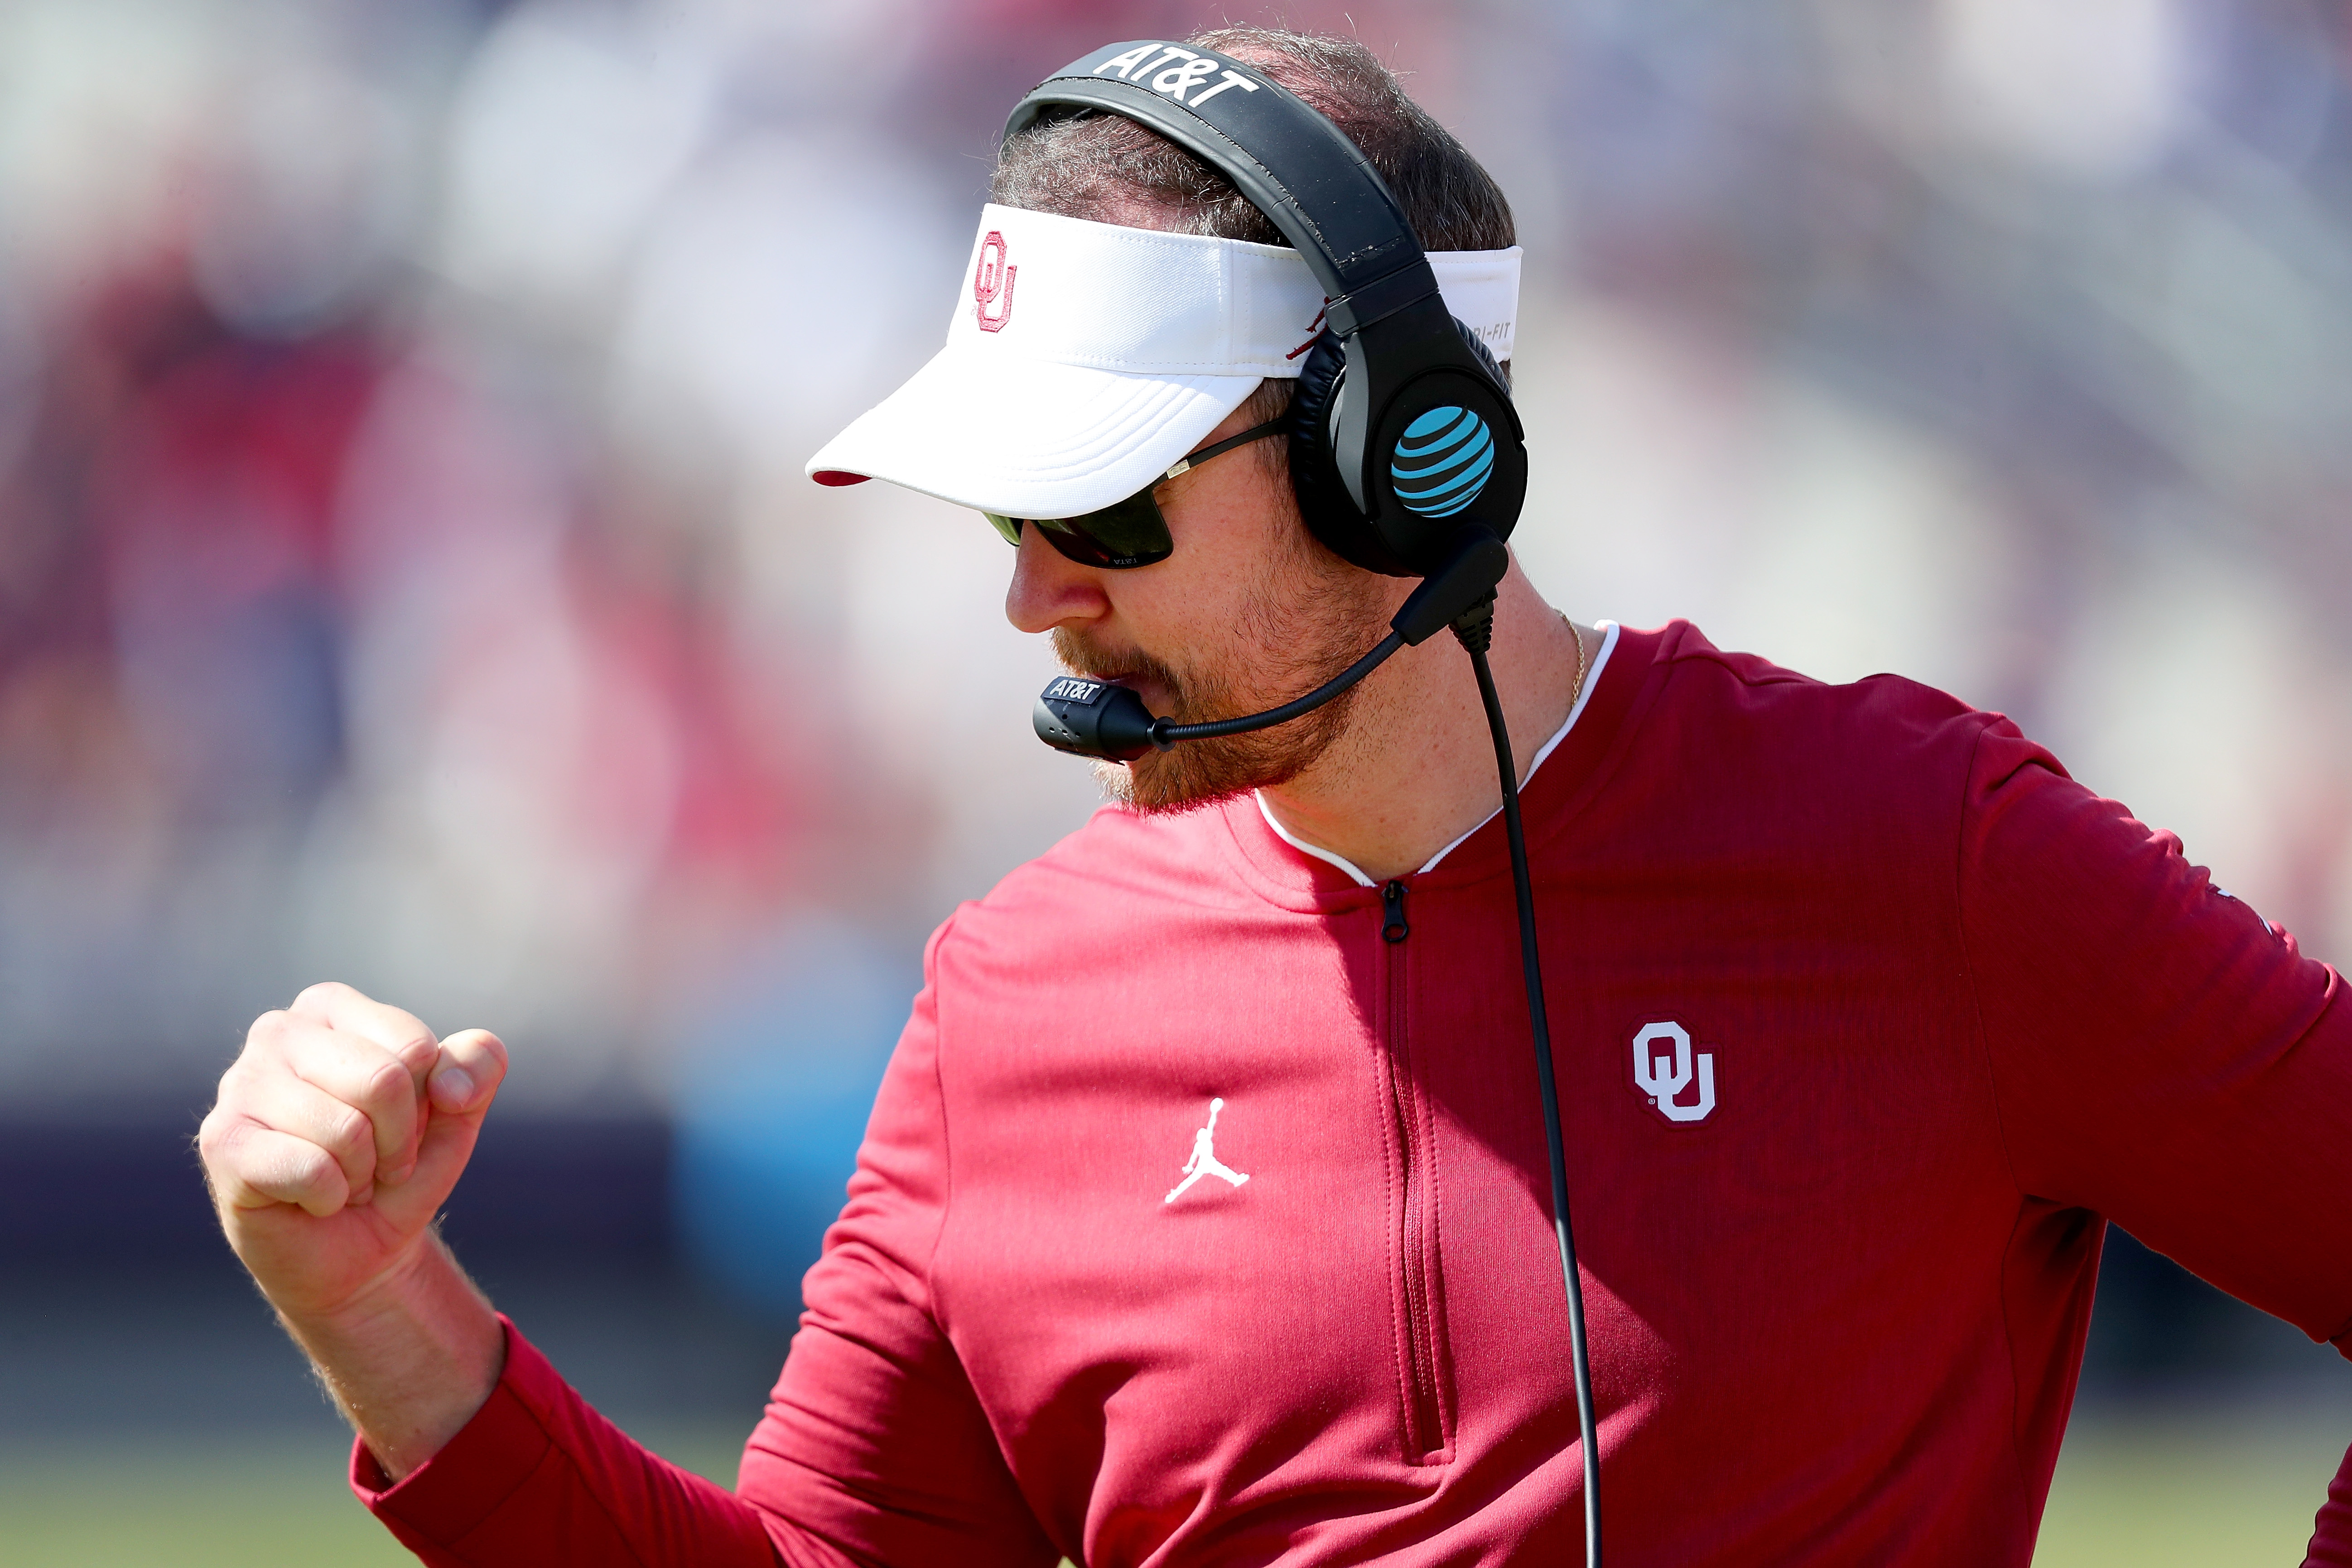 FORT WORTH, TX - OCTOBER 20: Head coach Lincoln Riley of the Oklahoma Sooners celebrates after the Oklahoma Sooners scored against the TCU Horned Frogs in the fourth quarter at Amon G. Carter Stadium on October 20, 2018 in Fort Worth, Texas. (Photo by Tom Pennington/Getty Images)